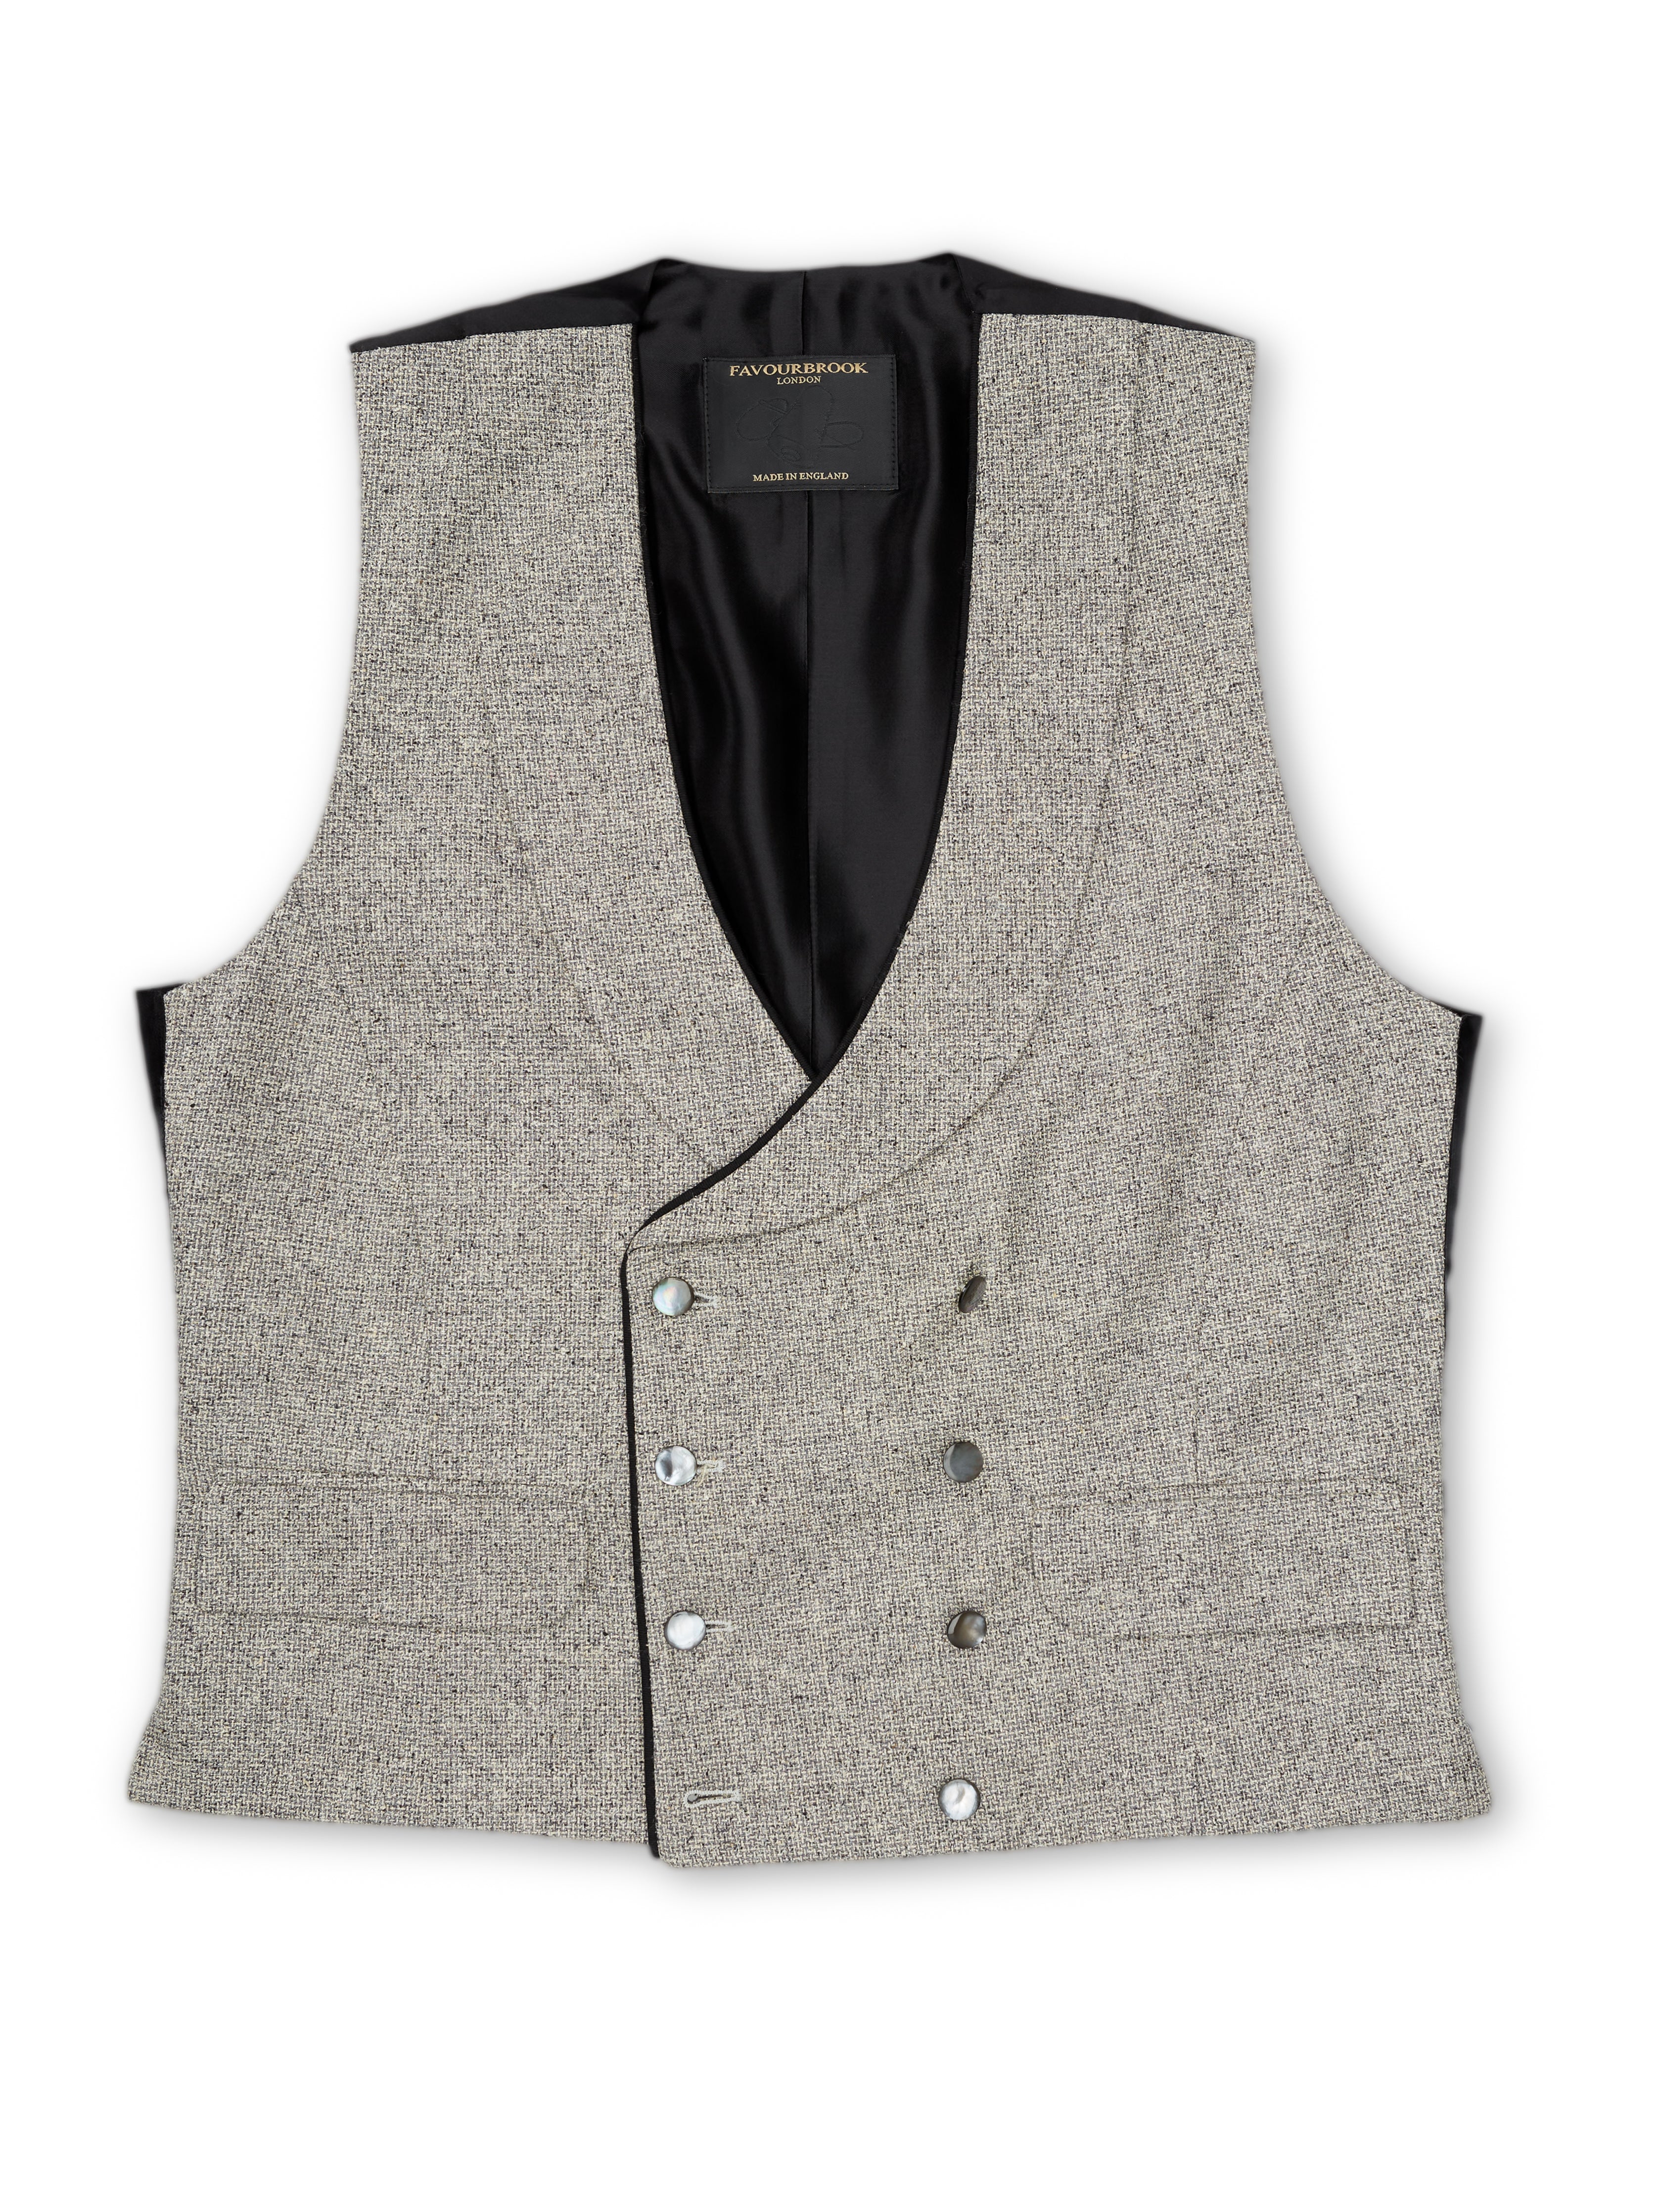 Osterley Grey Double Breasted 8 Button Shawl Lapel Piped Waistcoat